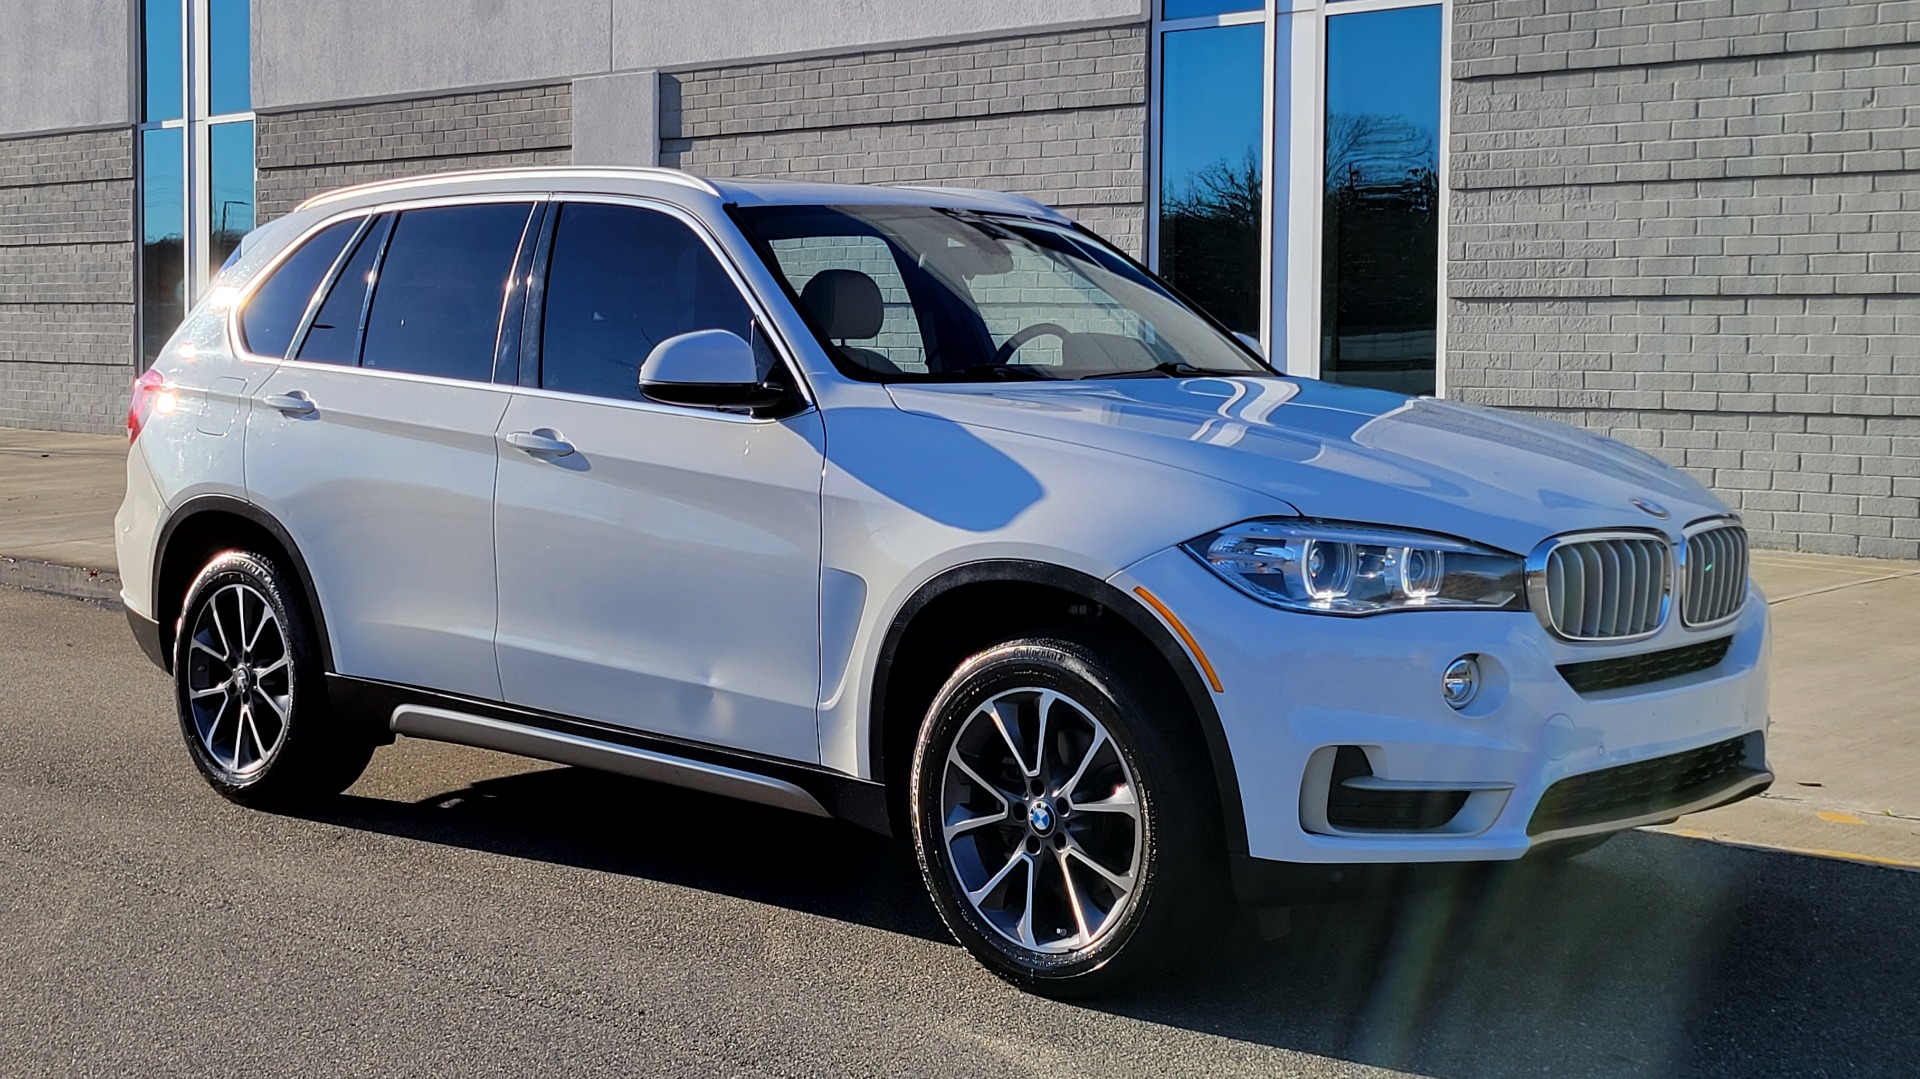 Used 2018 BMW X5 XDRIVE35I PREMIUM / DRVR ASST / HUD / WIRELESS CHARGING / HEATED SEATS for sale $41,995 at Formula Imports in Charlotte NC 28227 6